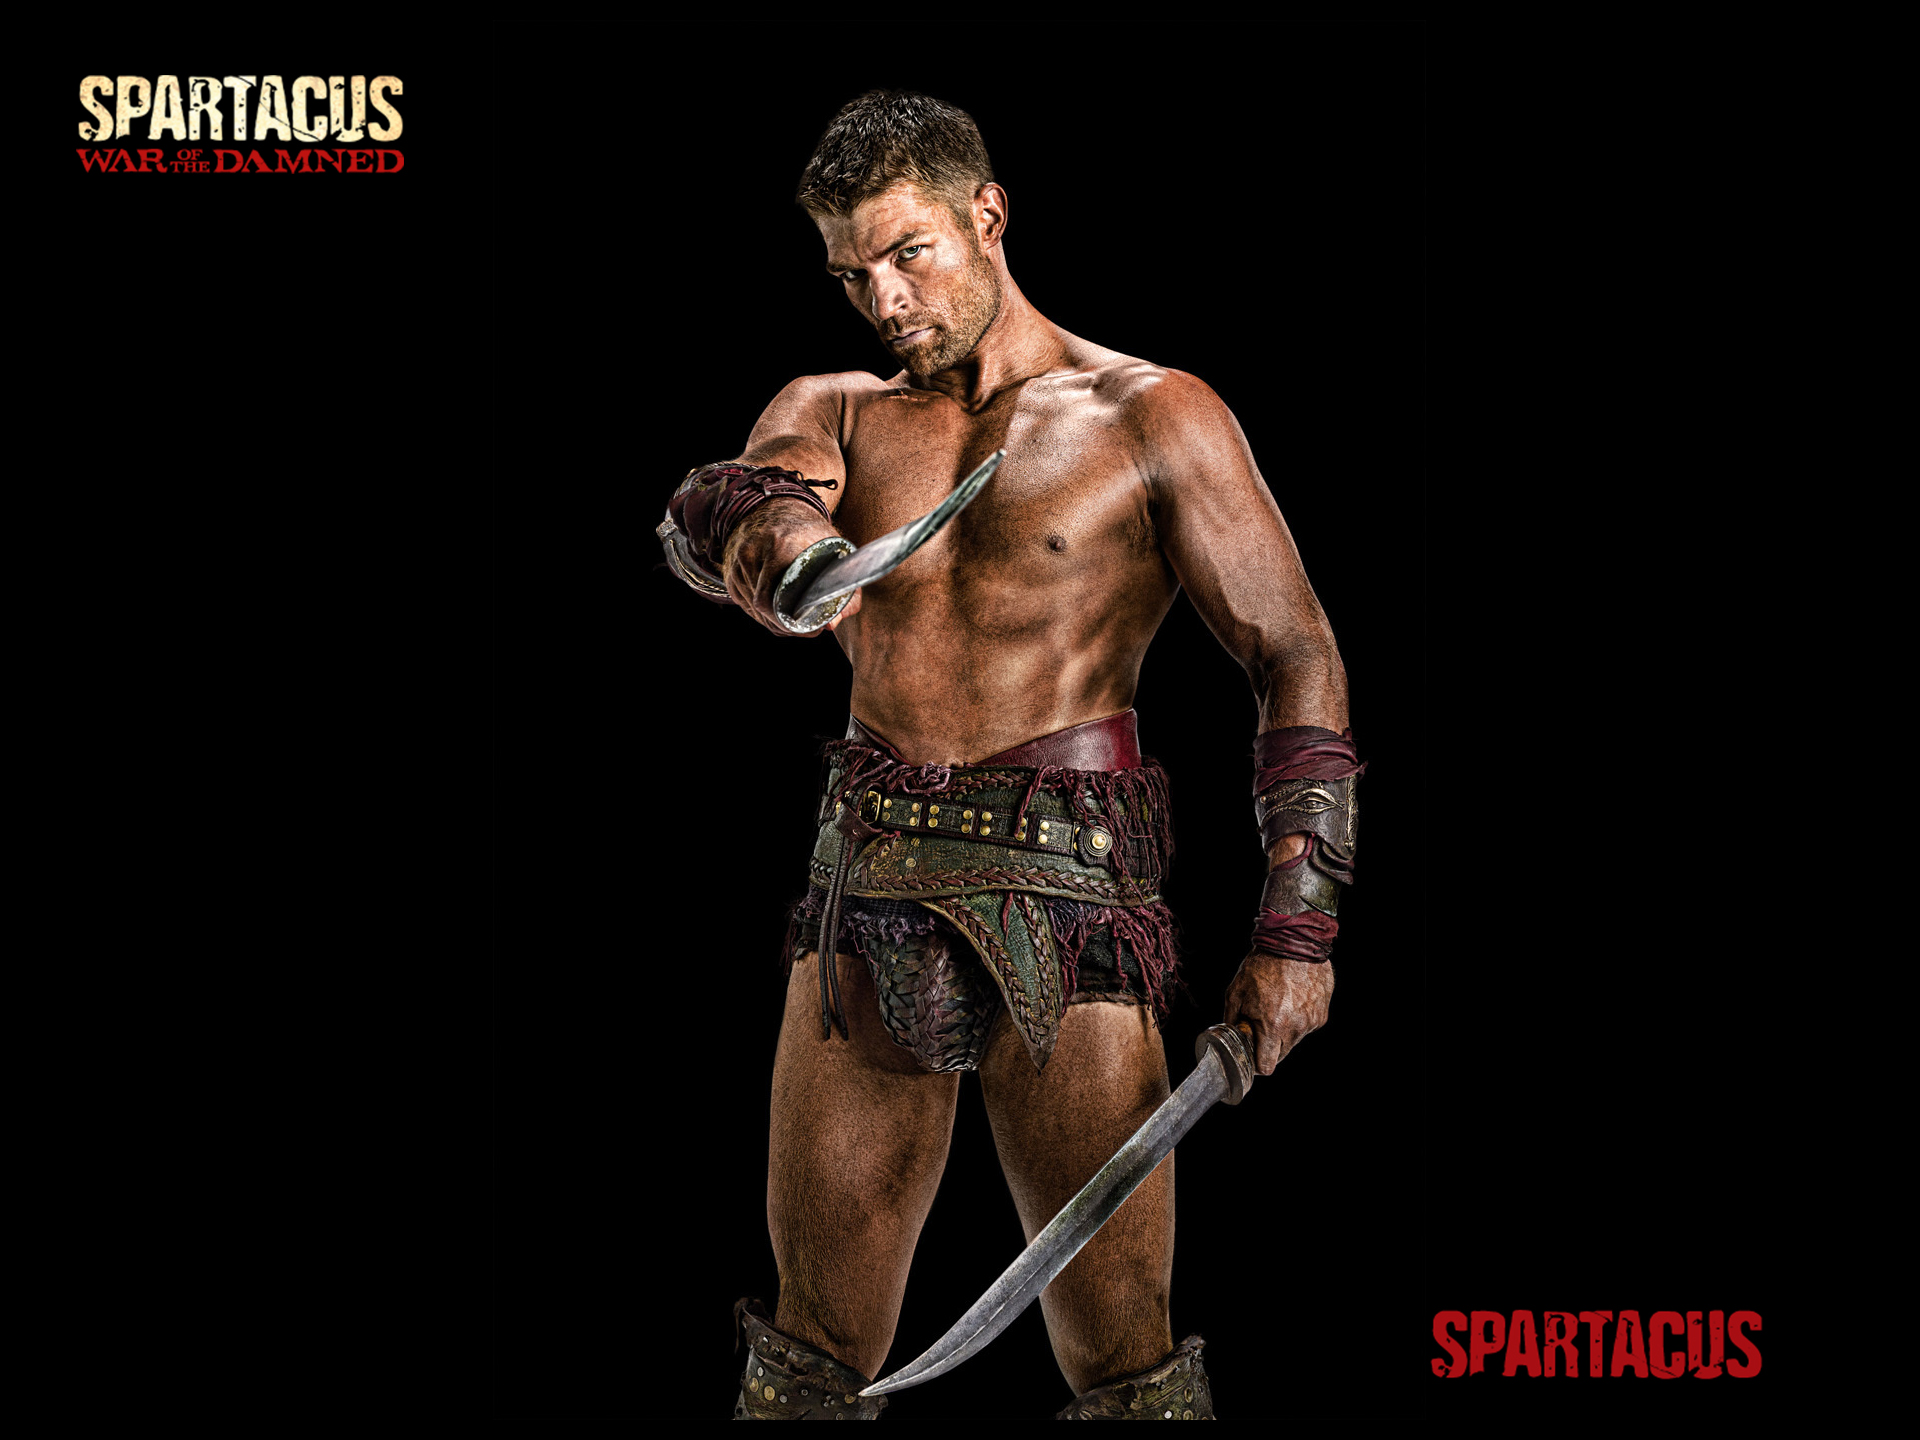 spartacus, tv show, spartacus: war of the damned lock screen backgrounds